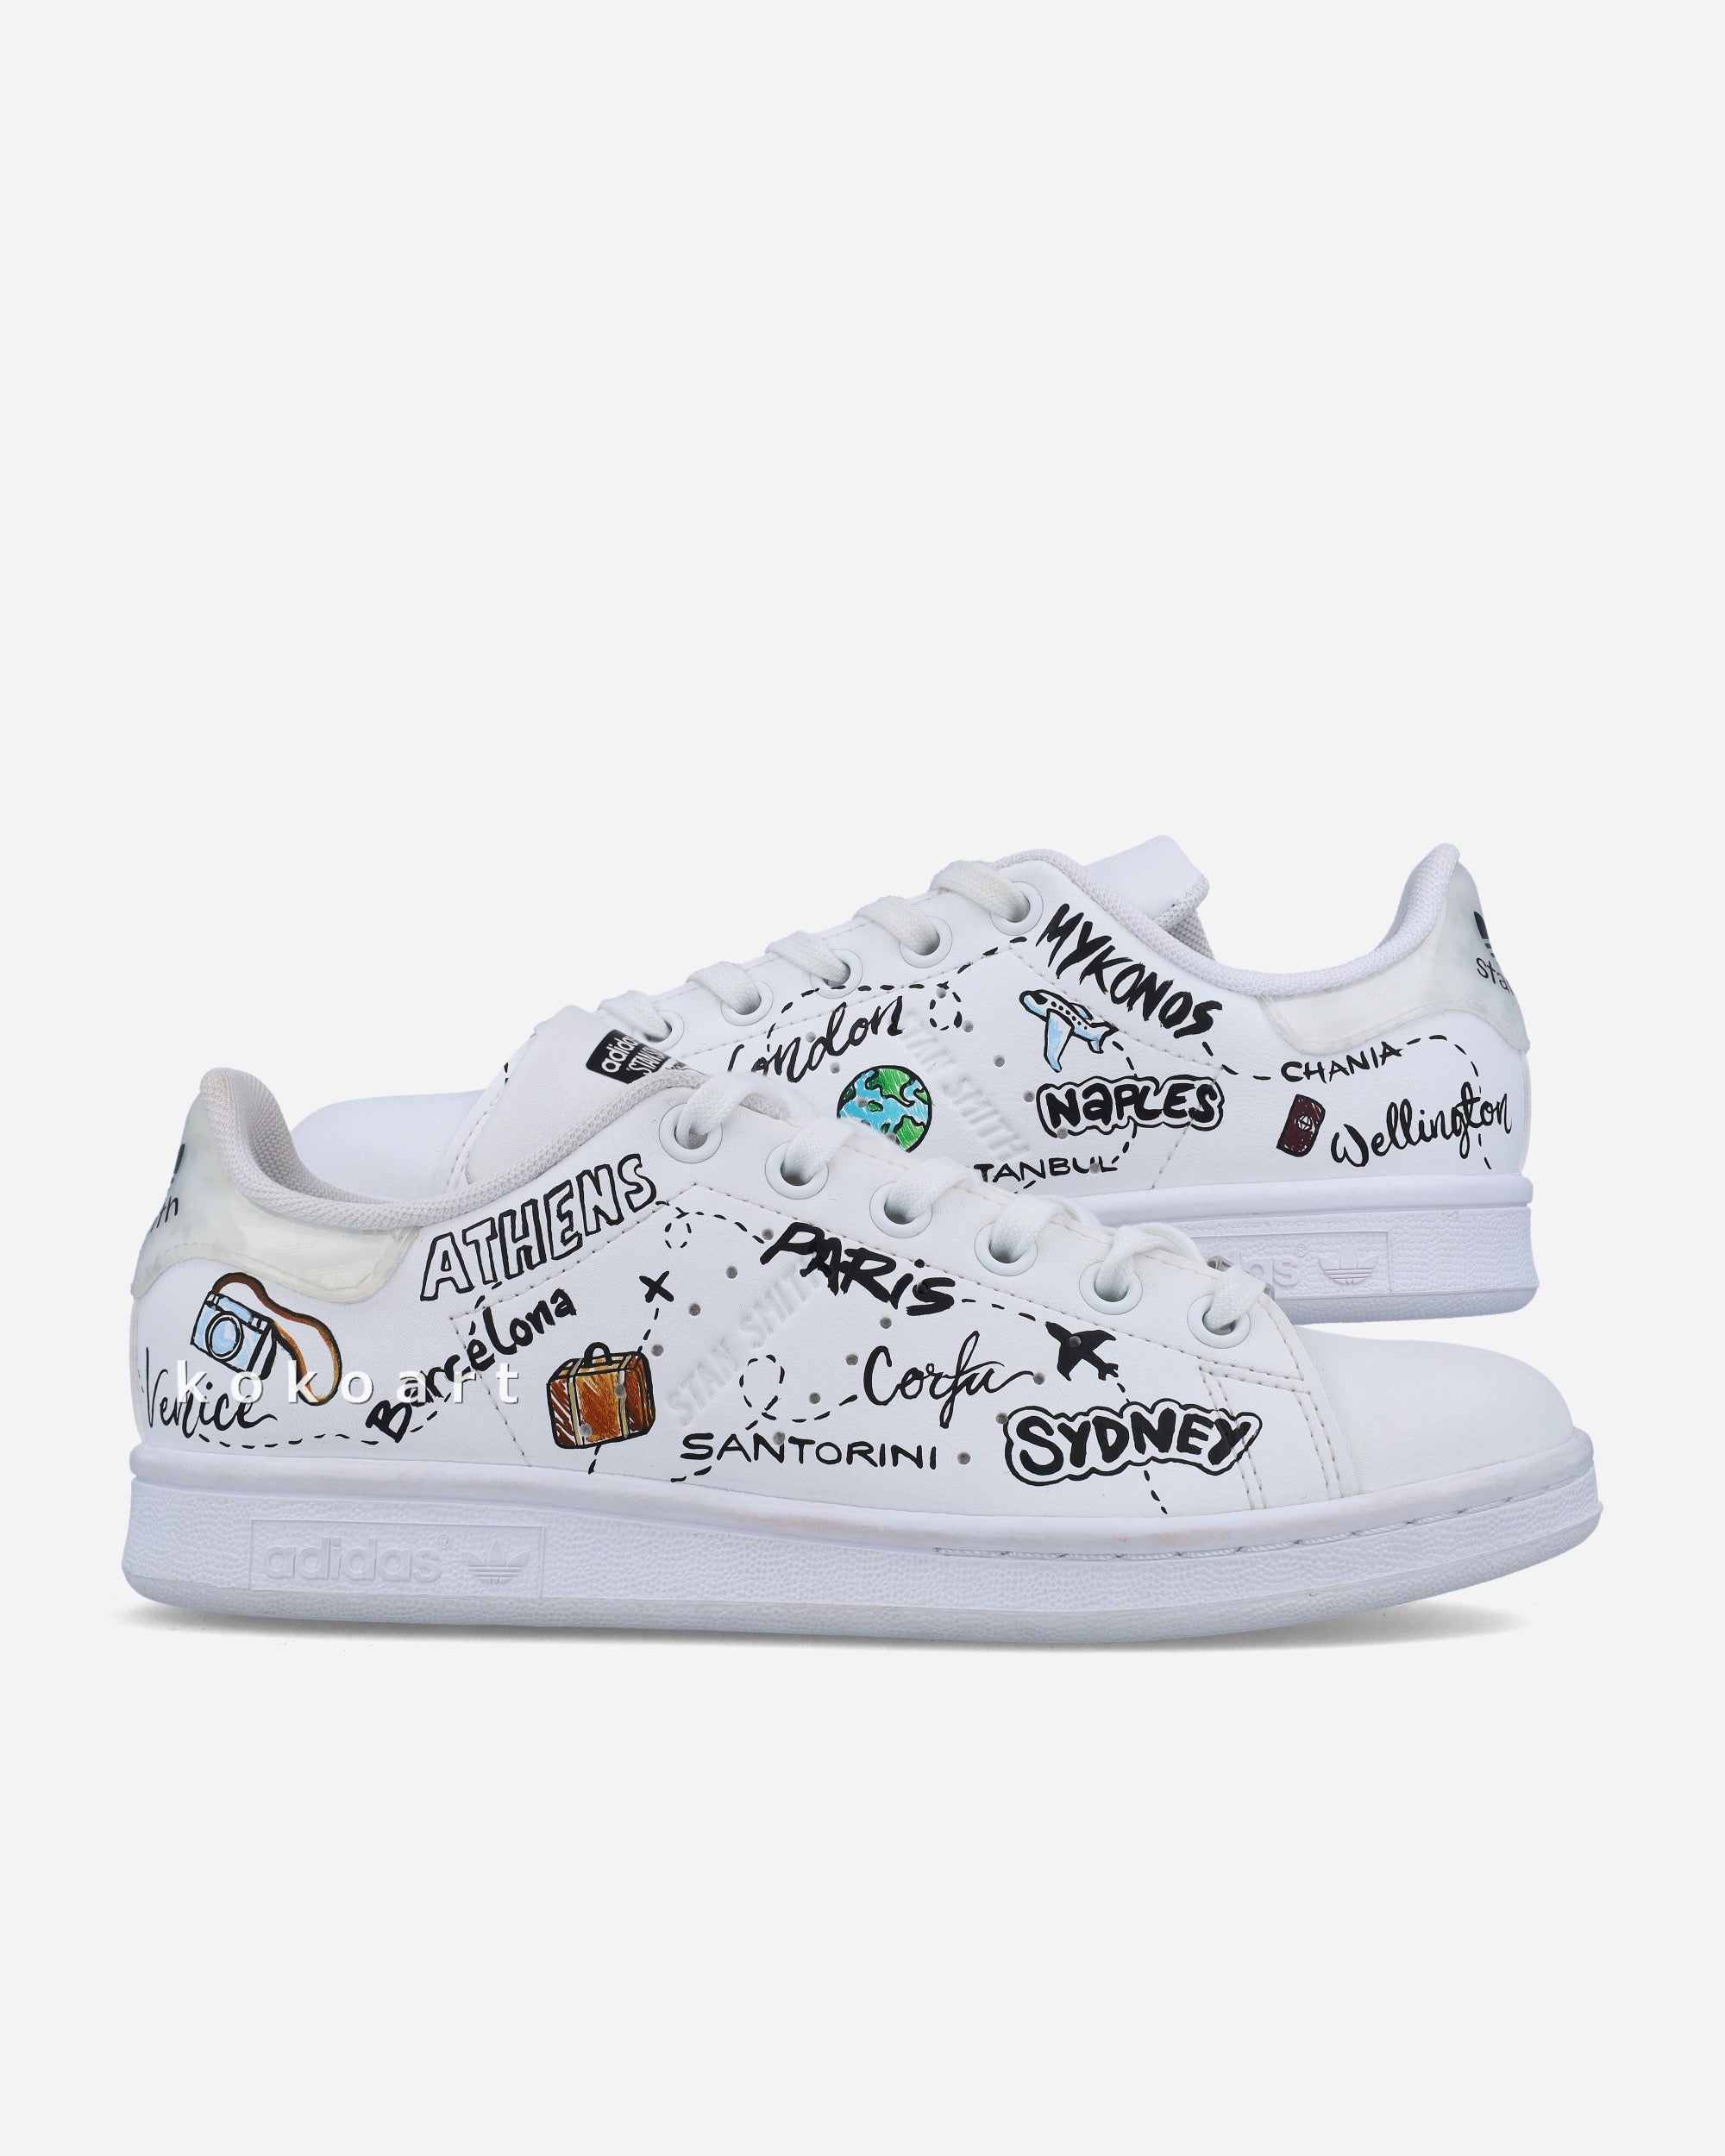 Stan Smith Hand Painted Travel Doodles